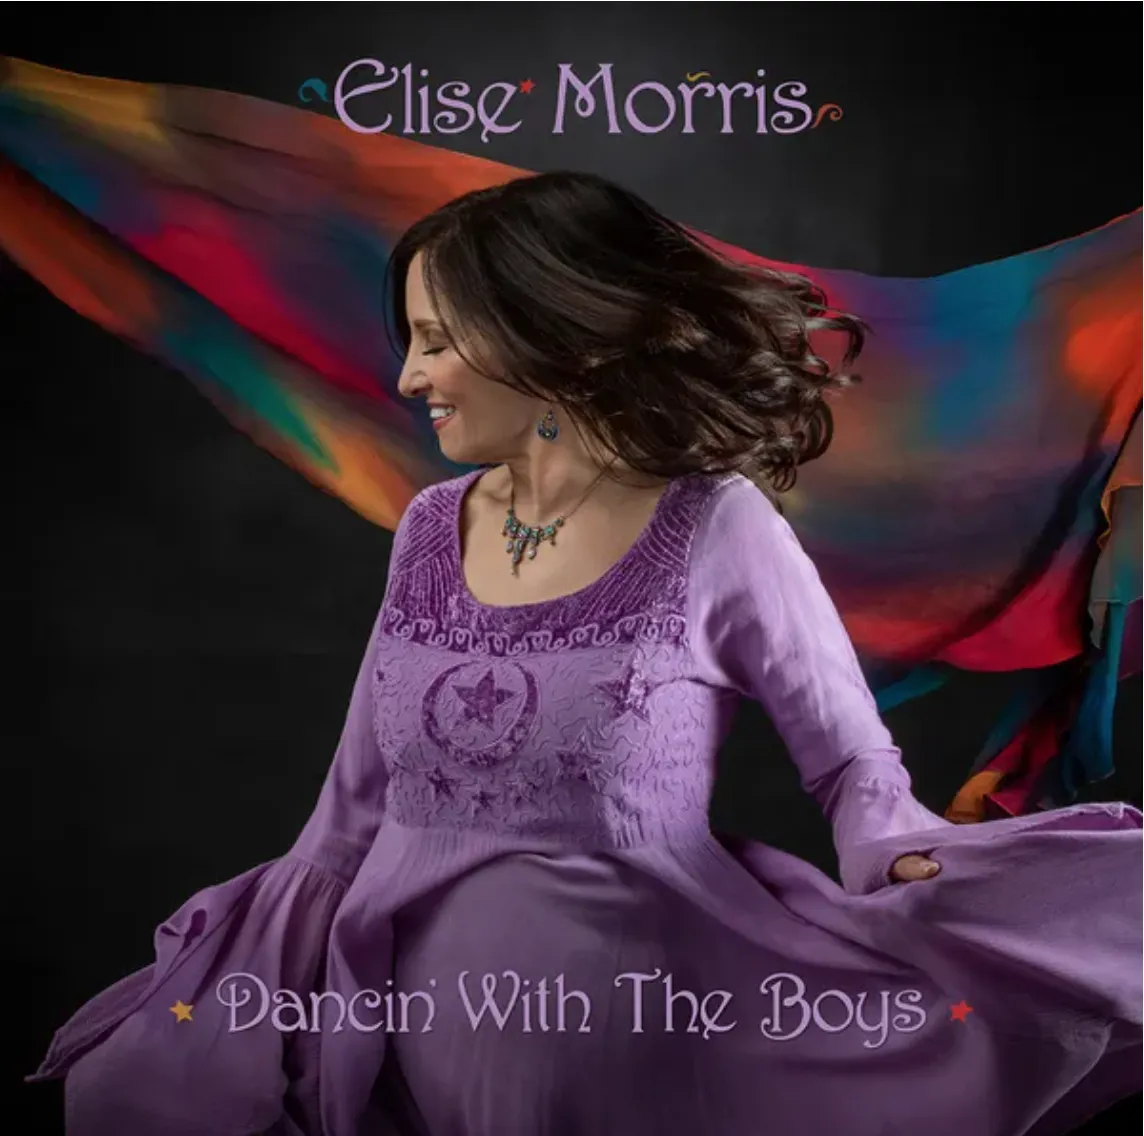 Album cover for 'Dancin' with the Boys' featuring Elise Morris, celebrated eclectic jazz musician and singer-songwriter, showcasing her unique artistic style and musical depth.